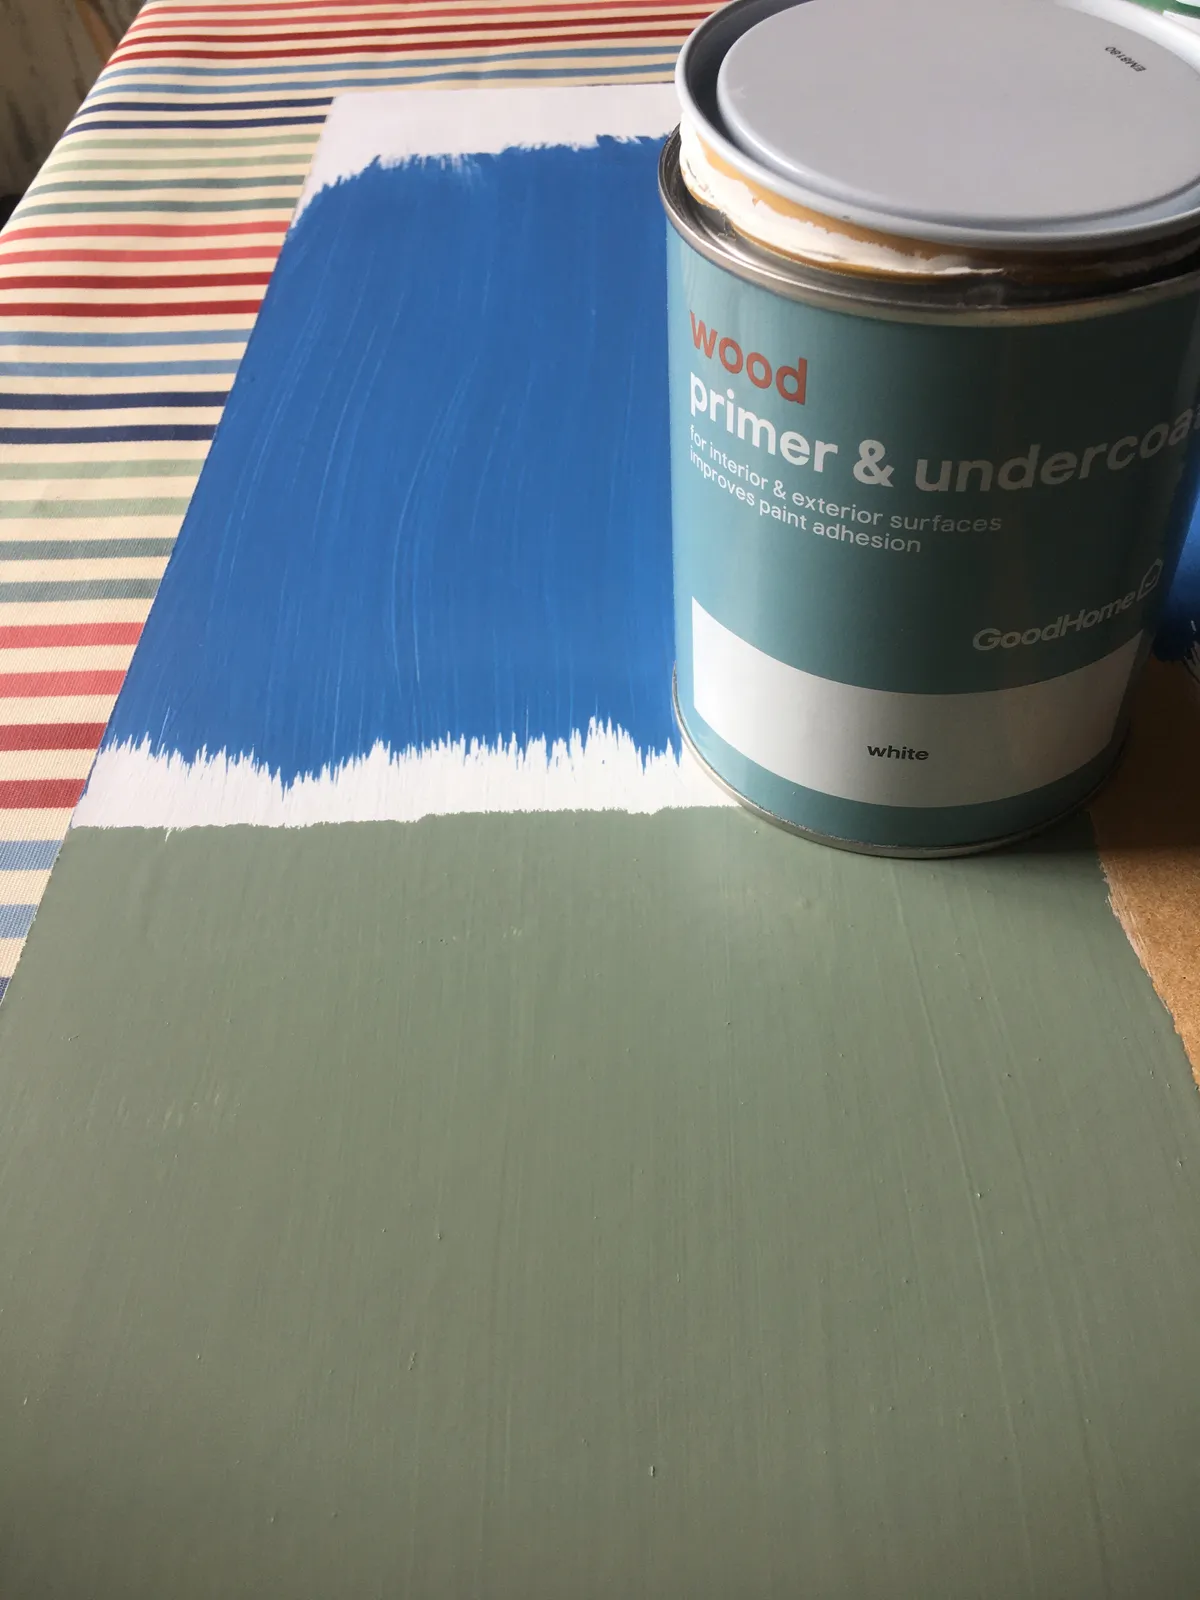 Goodhome primer and undercoat